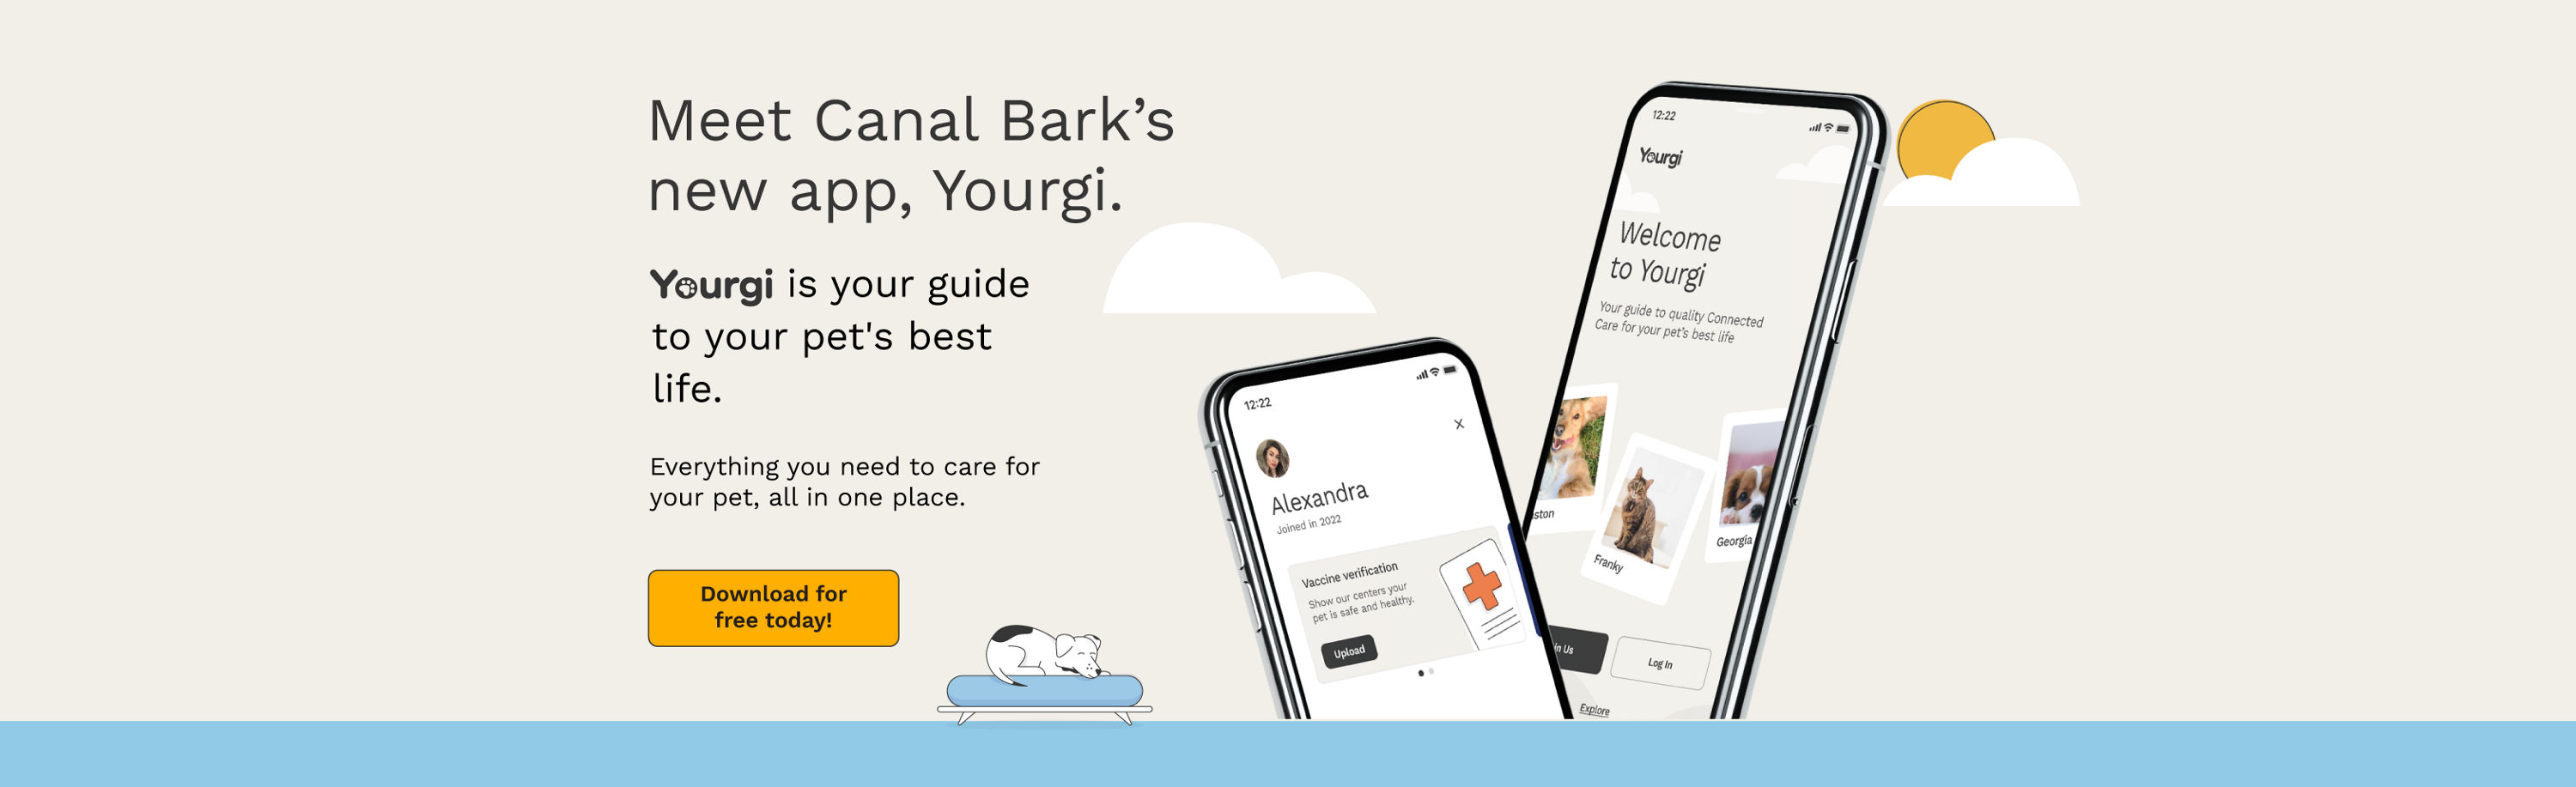 Meet Canal Bark's new app, Yourgi.